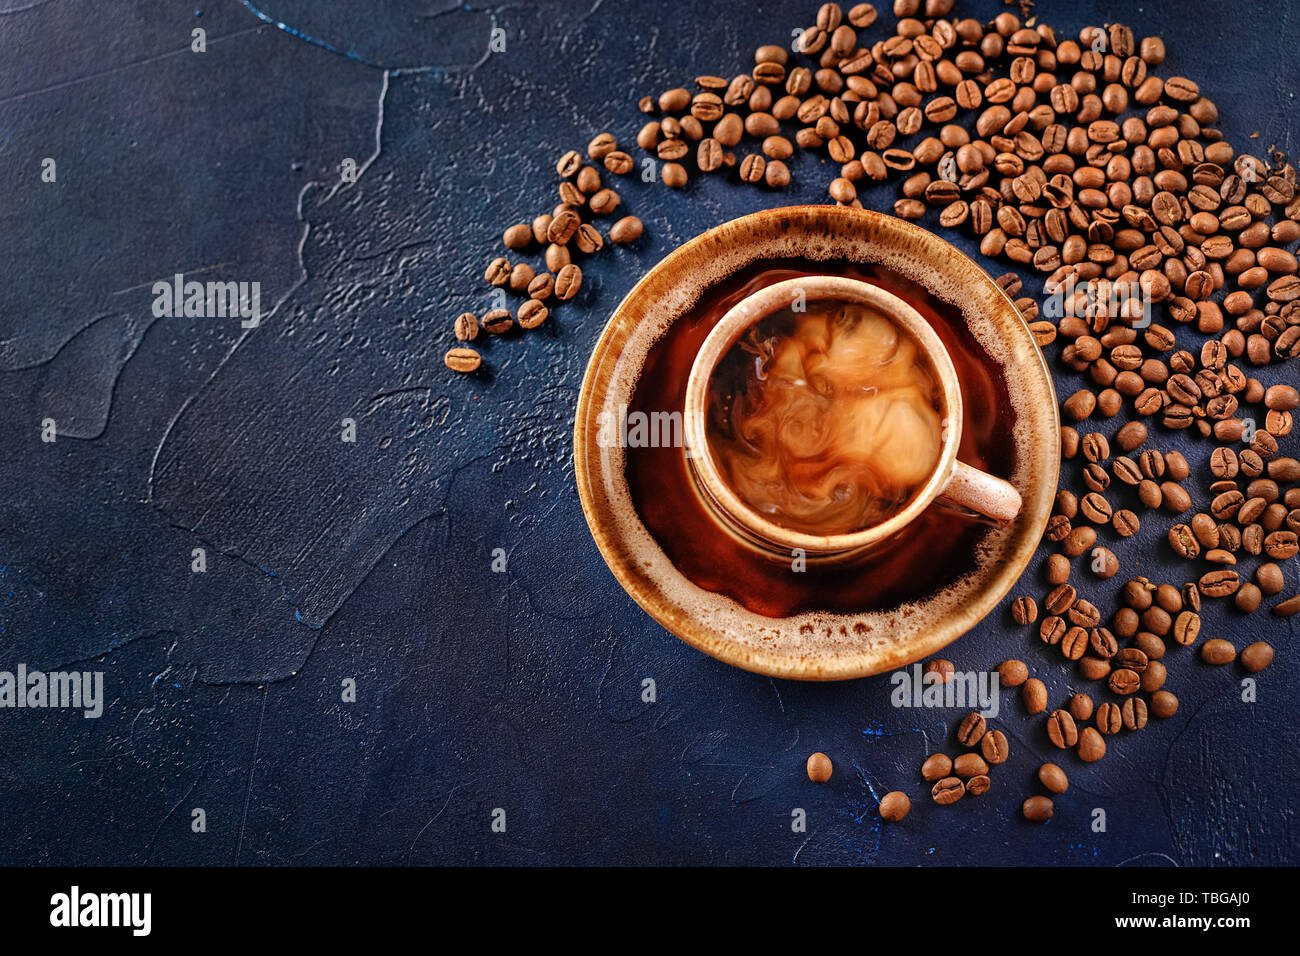 Top view of coffee cup on blue background Stock Photo